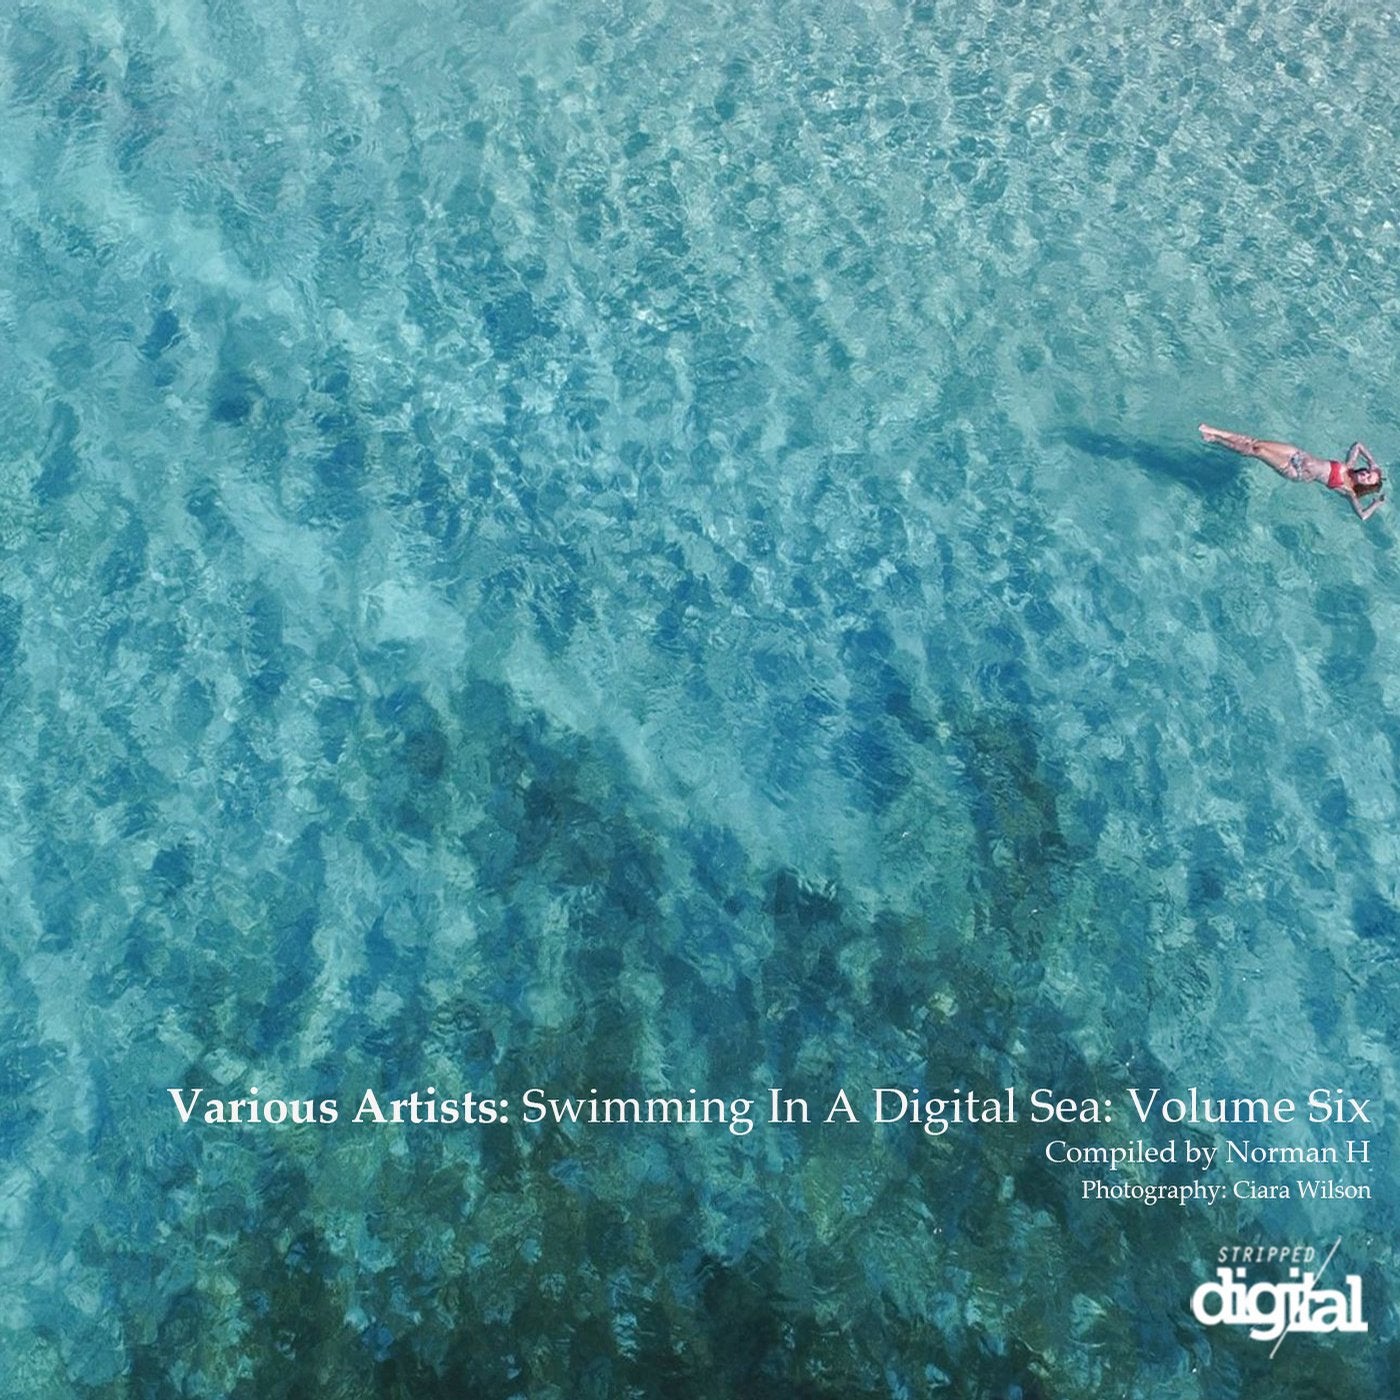 Swimming in a Digital Sea: Volume Six - Compiled by Norman H